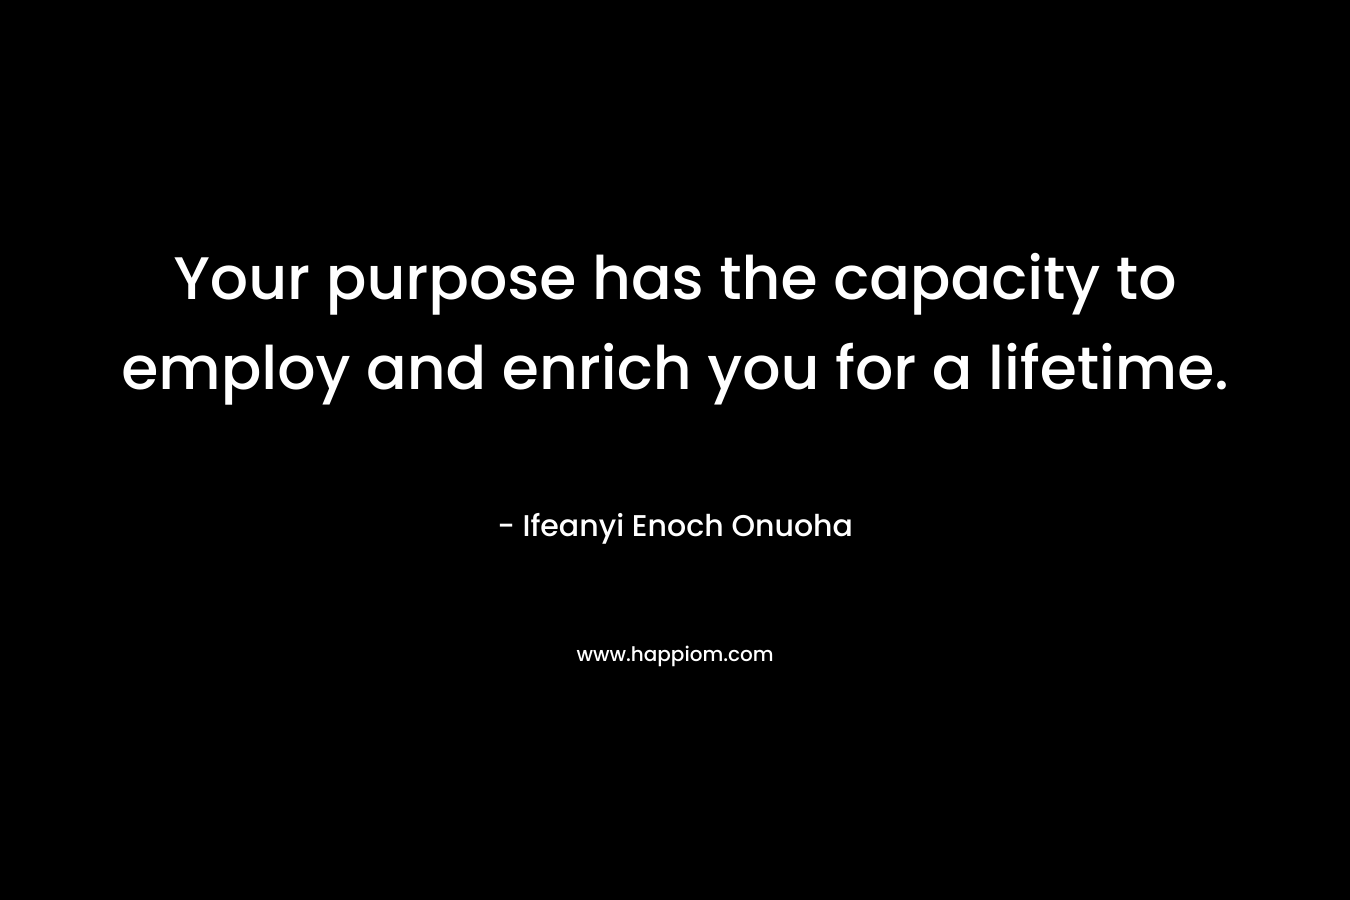 Your purpose has the capacity to employ and enrich you for a lifetime. – Ifeanyi Enoch Onuoha